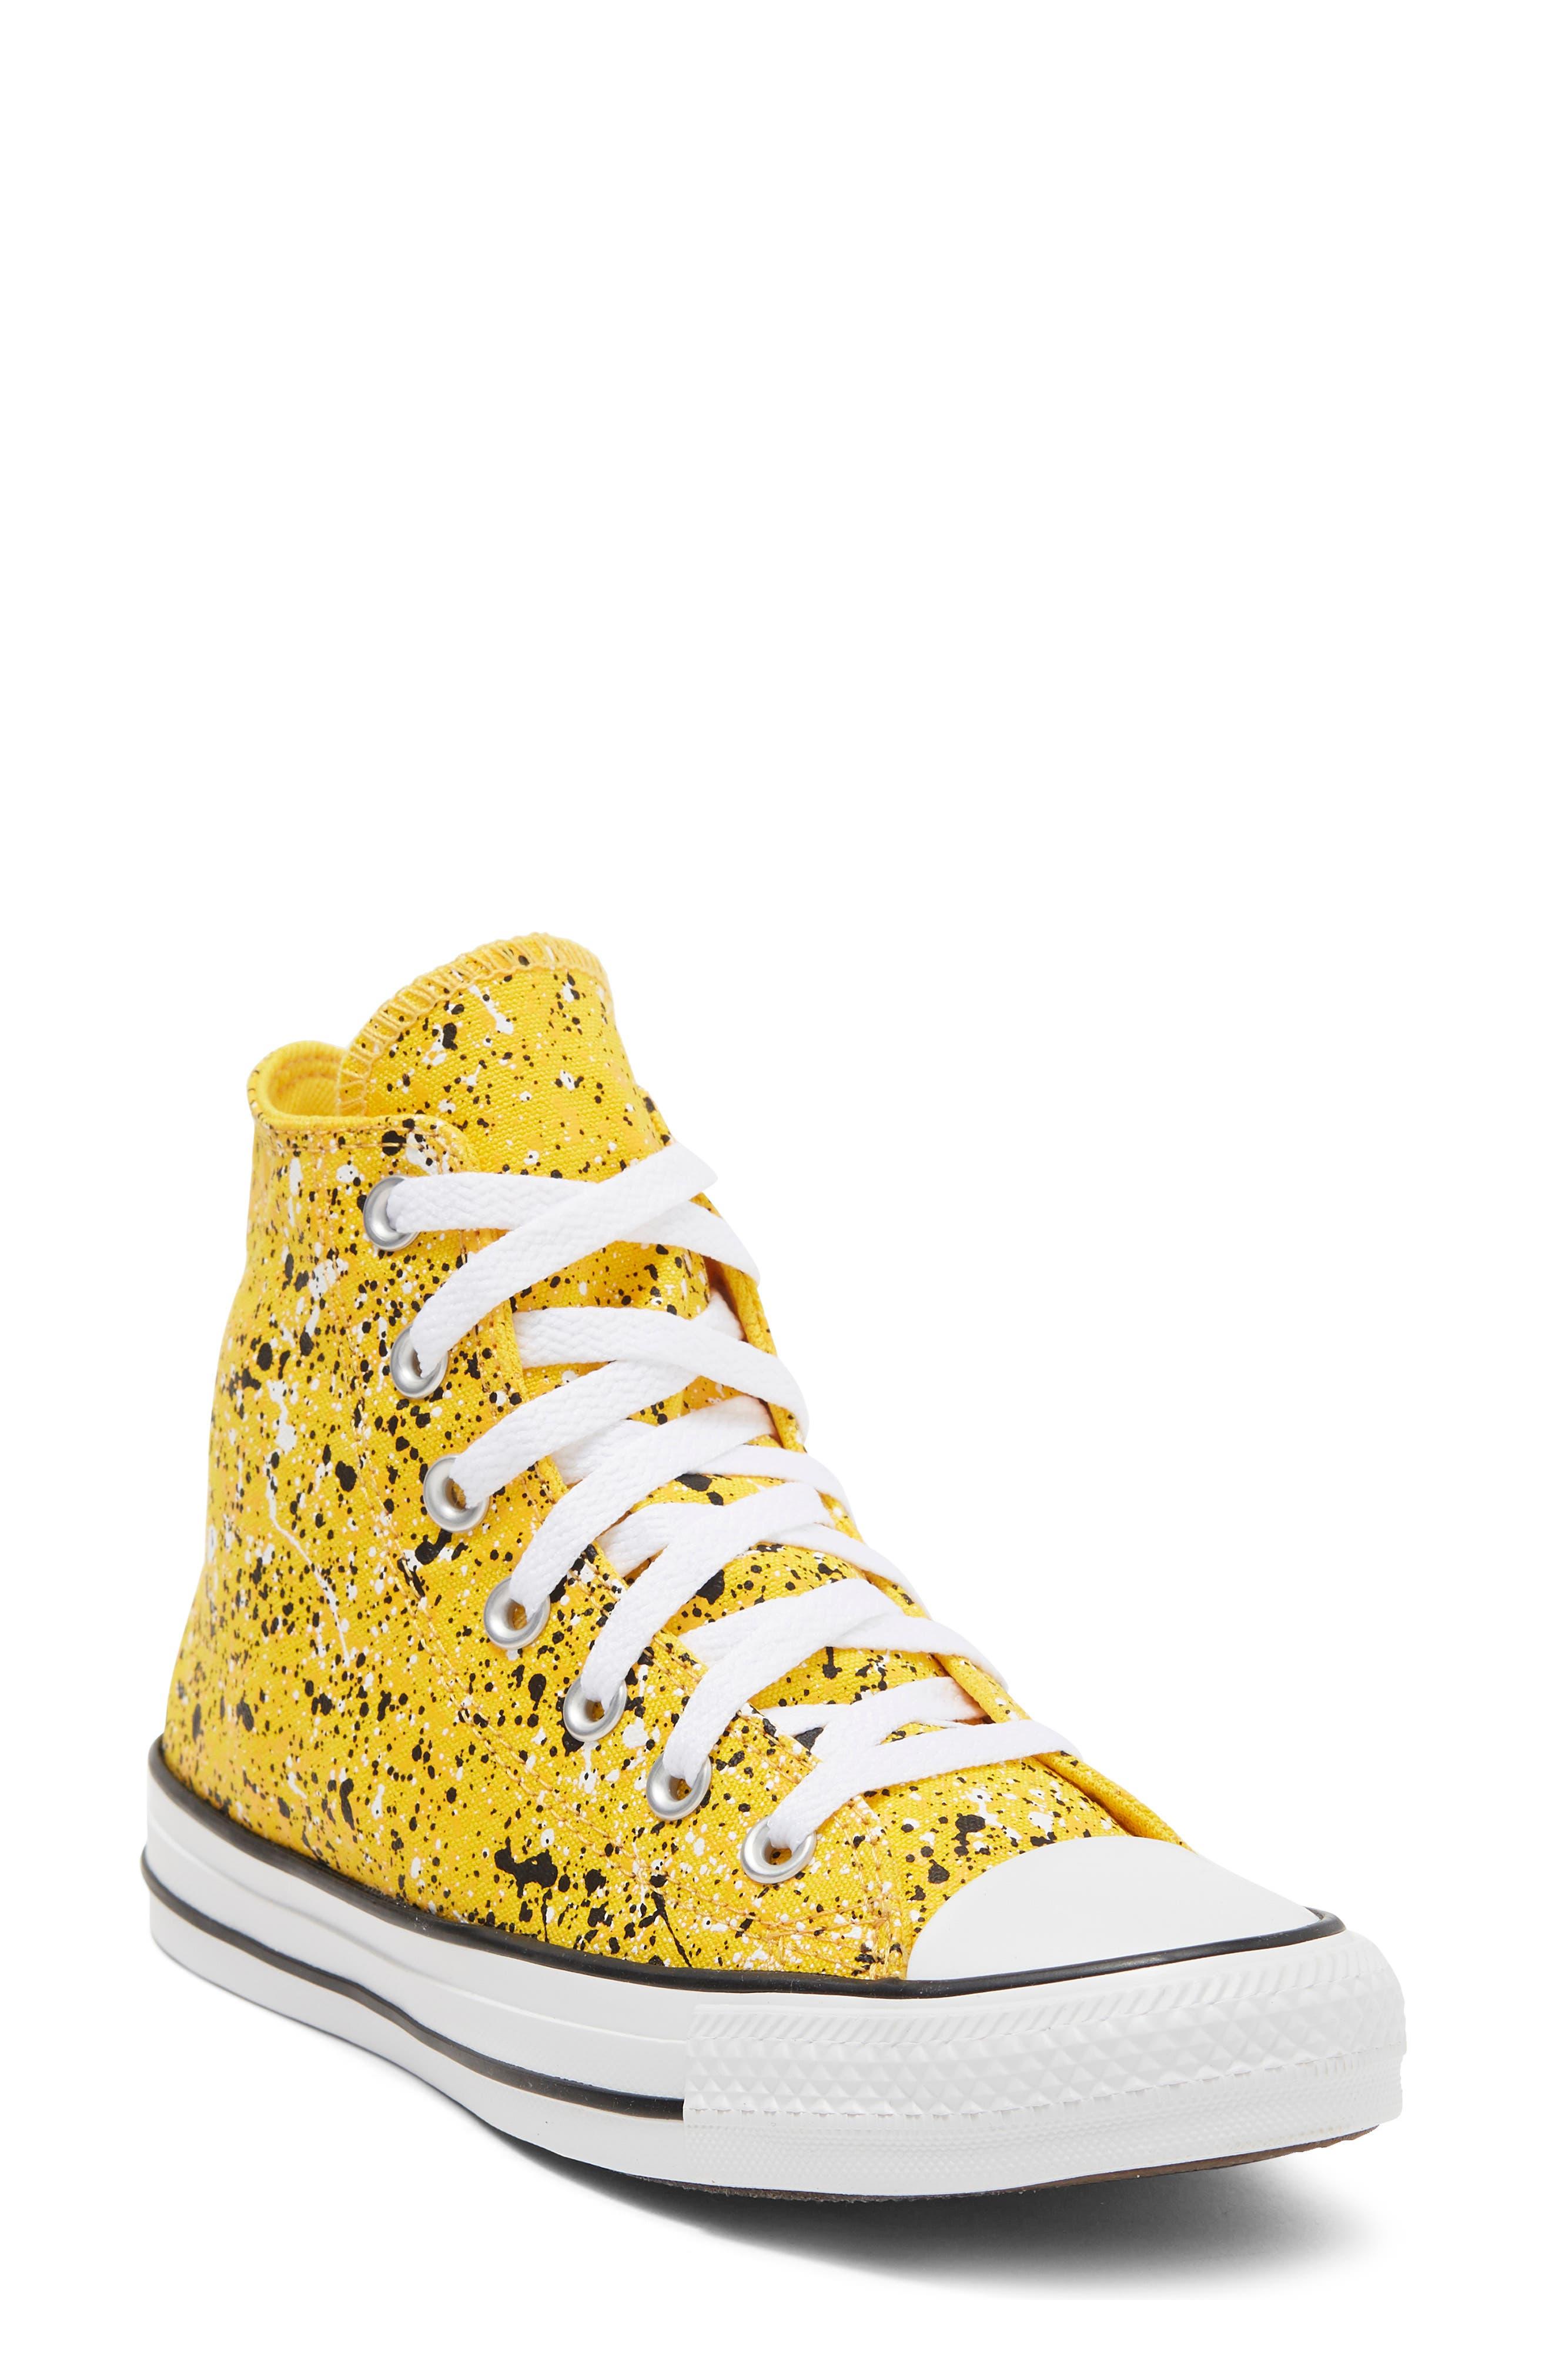 Converse Chuck Taylor All Star Amarillo Sneaker in Yellow | Lyst